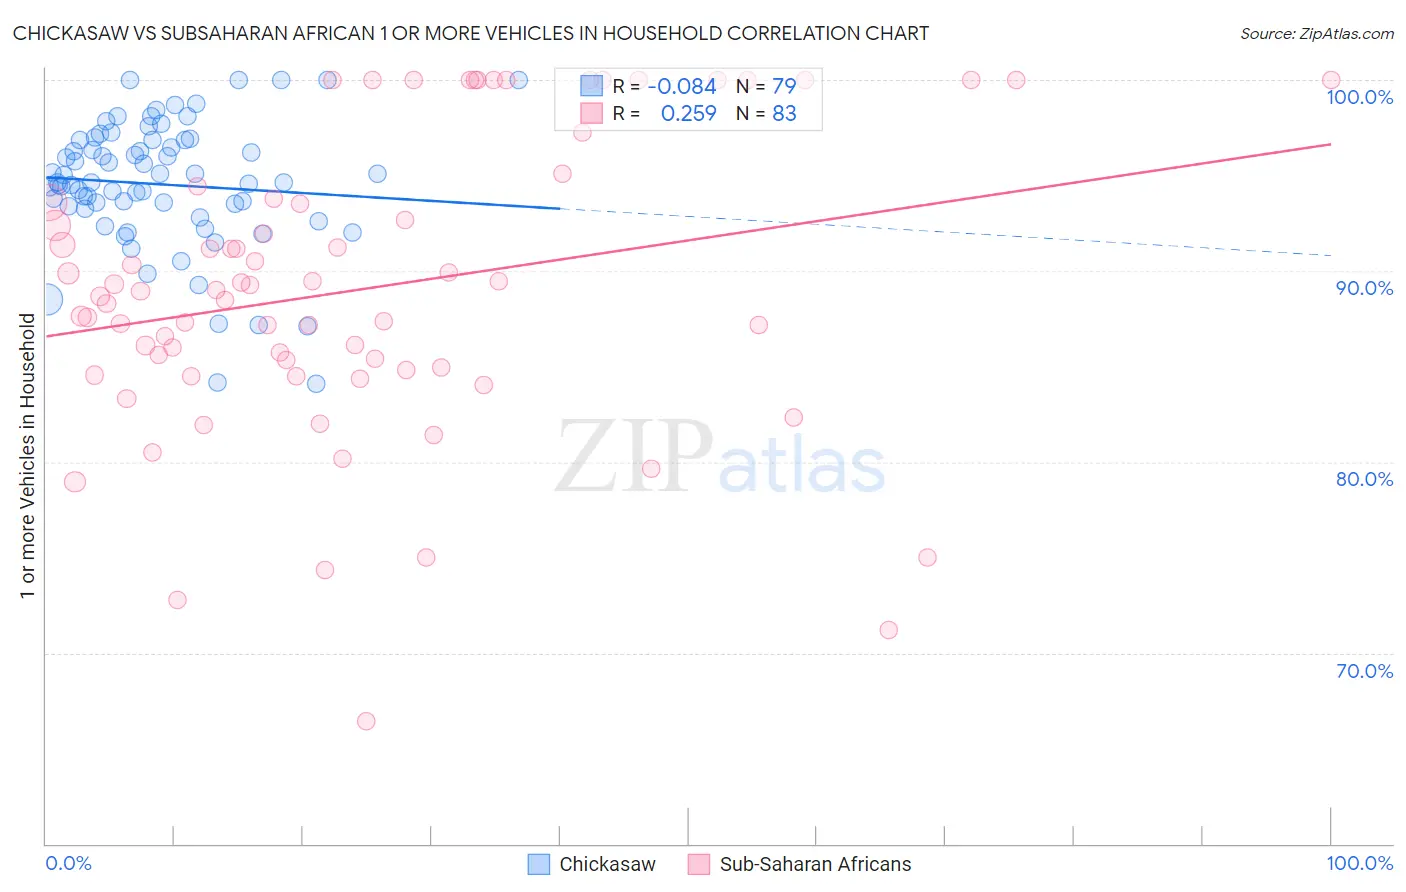 Chickasaw vs Subsaharan African 1 or more Vehicles in Household